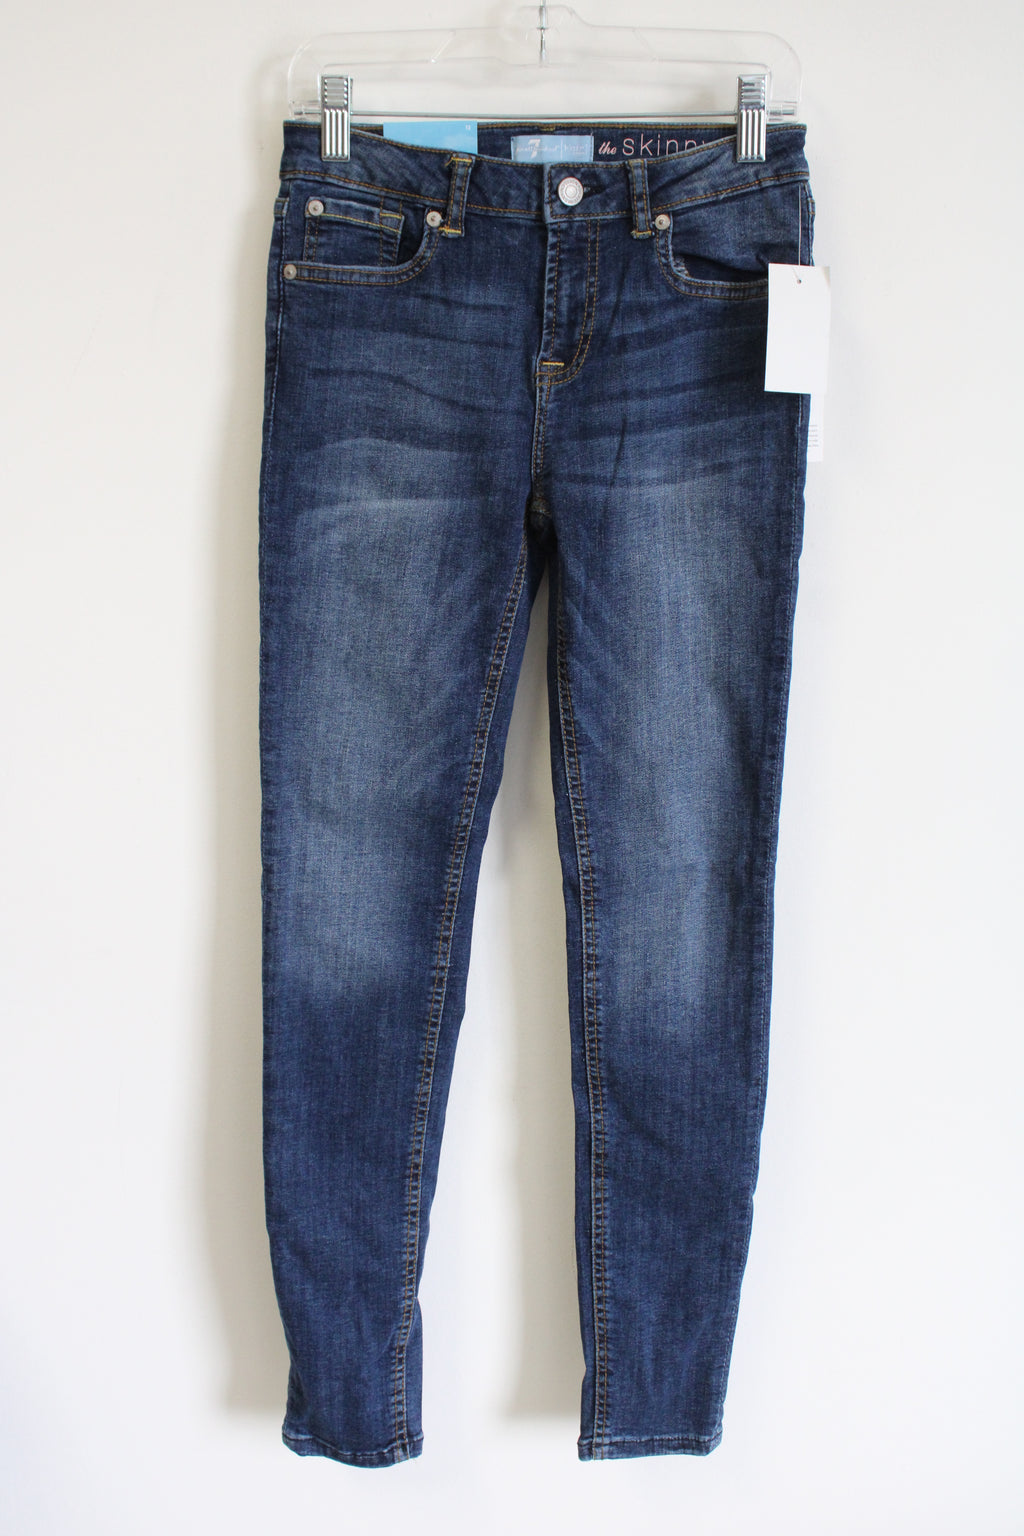 NEW Blair Denim 7 For All Mankind The Skinny Jeans | Youth 12